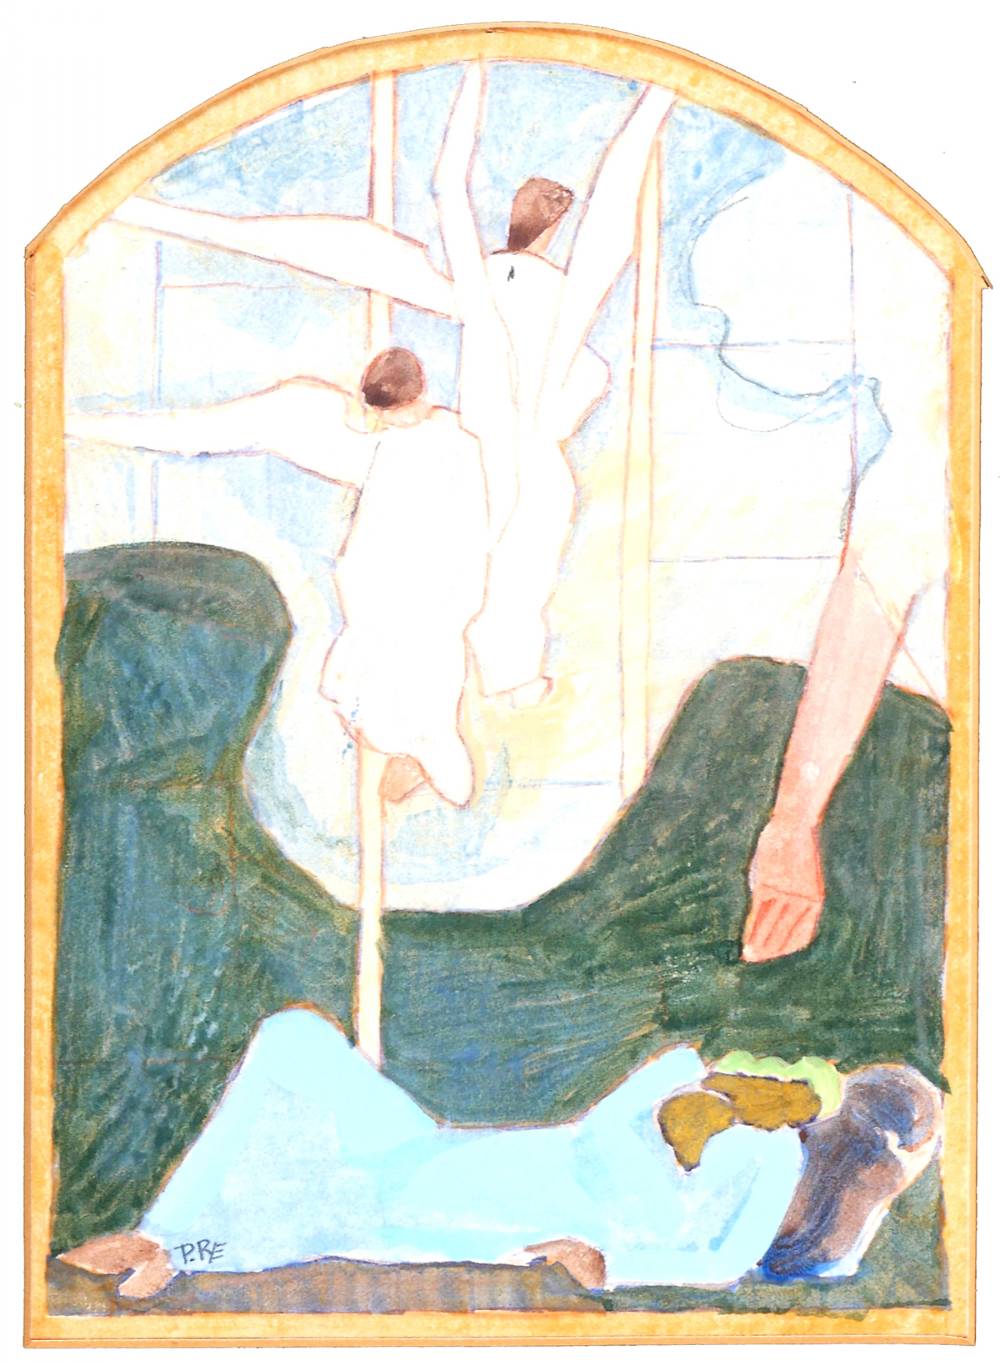 JACOB'S DREAM, STUDY FOR STAINED GLASS WINDOW AT LISNACRANE, UPPER GLENAGEARY ROAD, COUNTY DUBLIN by Patrick Pye sold for 210 at Whyte's Auctions